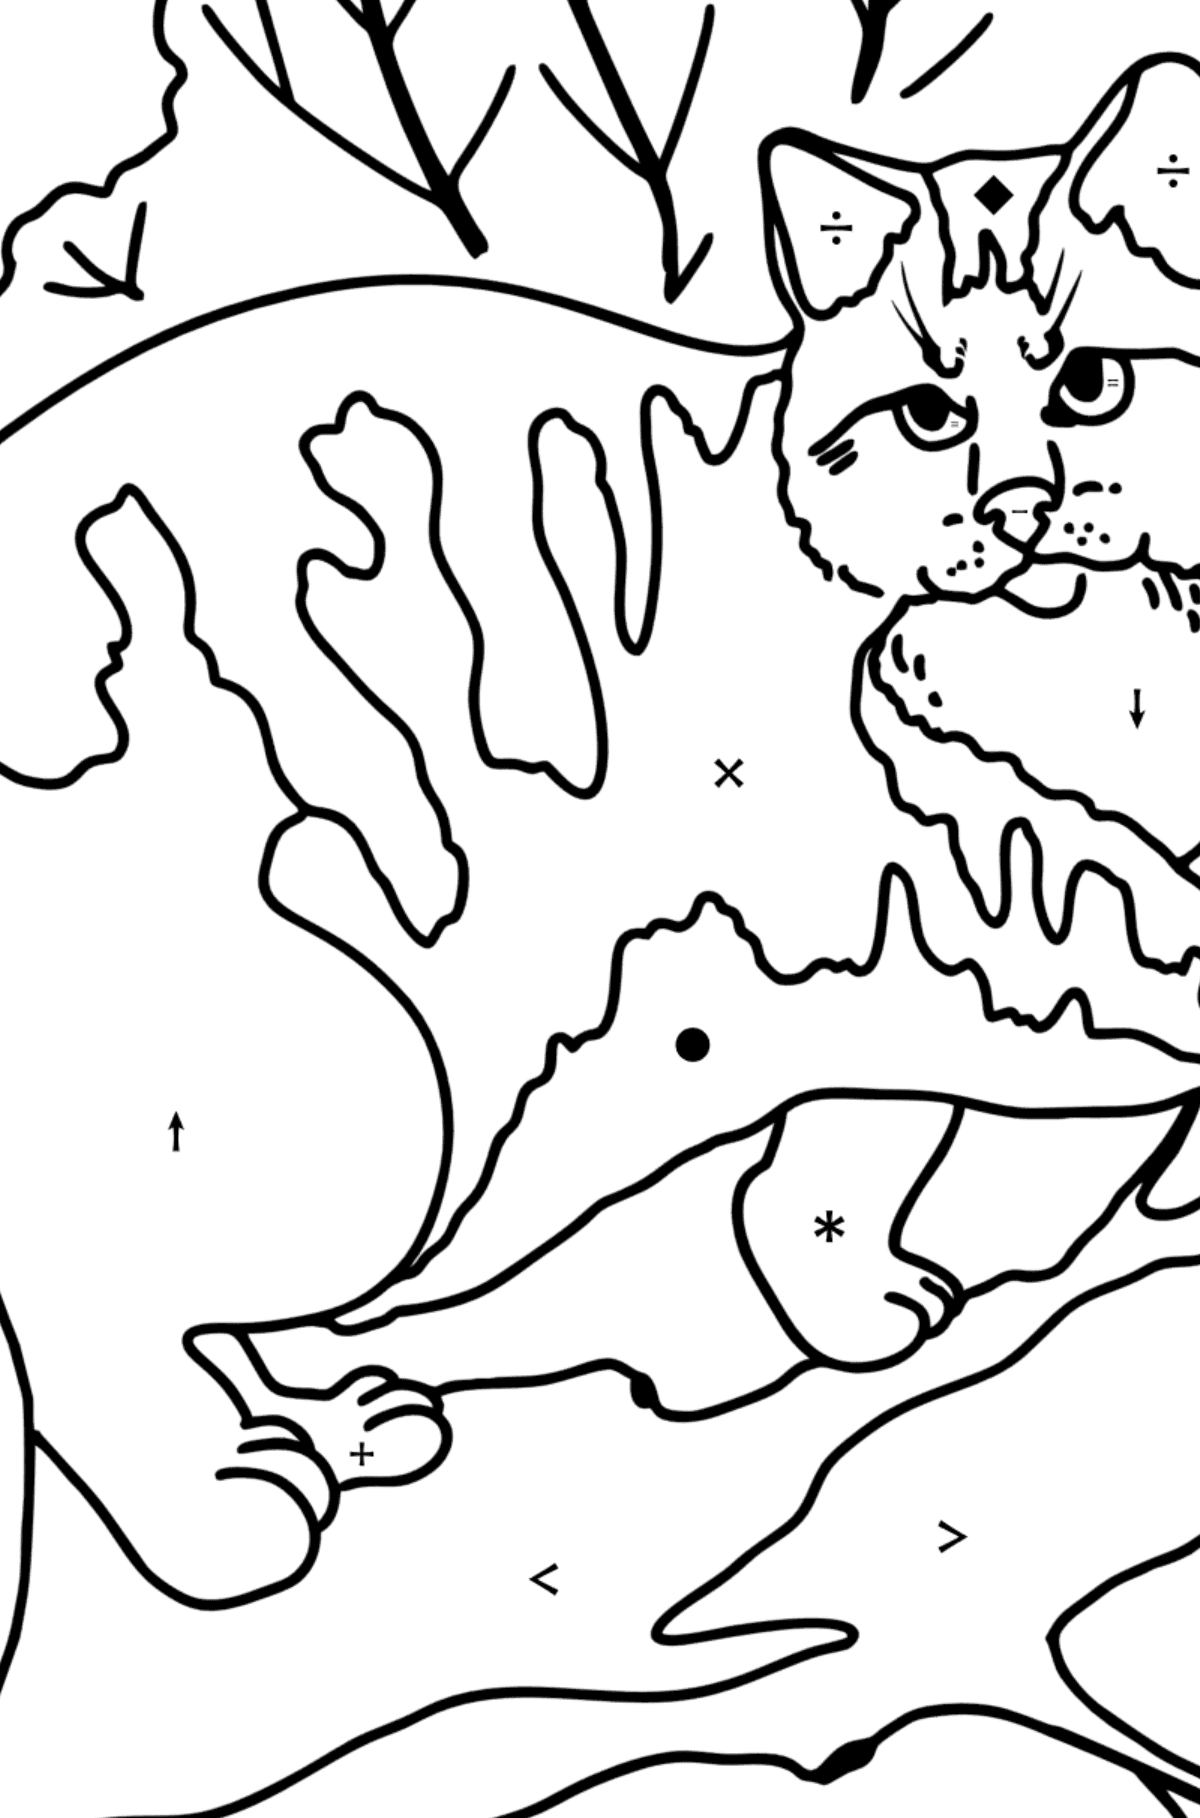 Wild Forest Cat coloring page - Coloring by Symbols for Kids